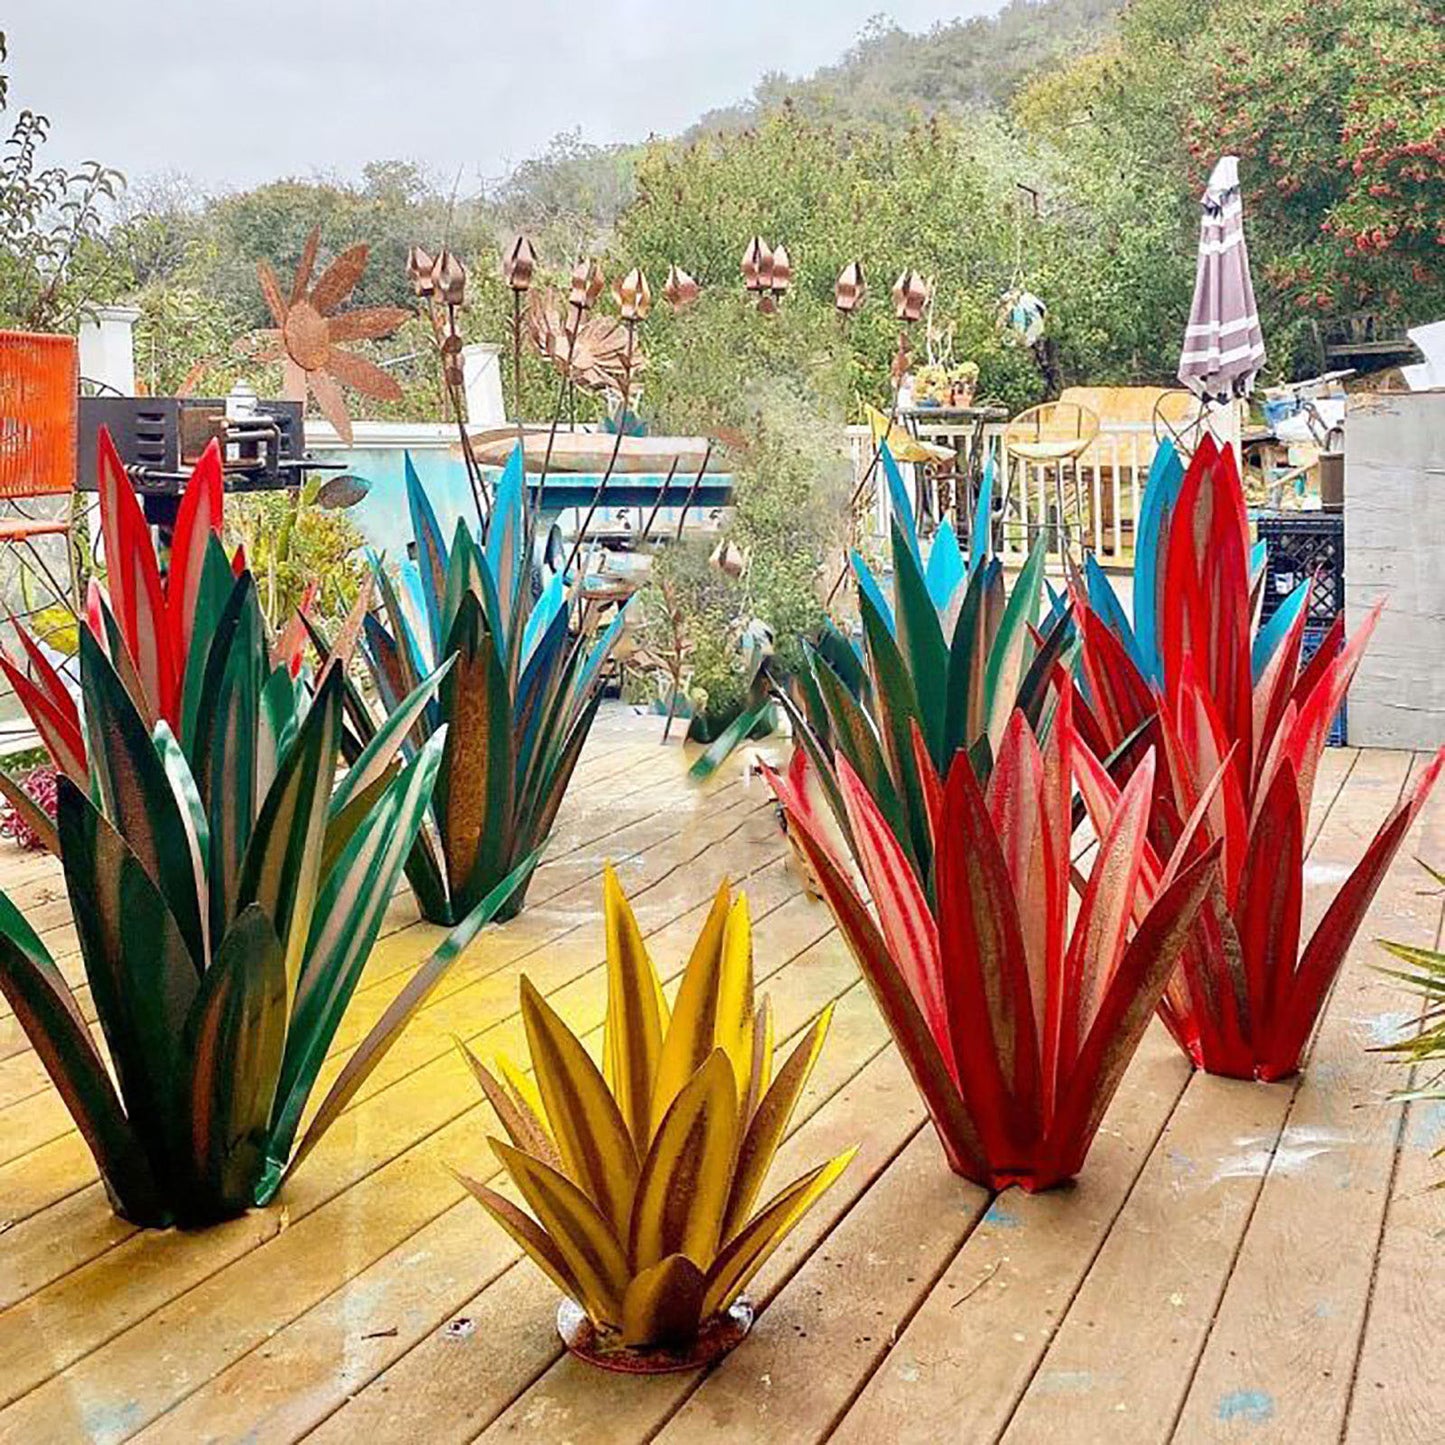 3 SIZES AVAILABLE: 10.6/ 13.7 / 25.5 INCHES DIY Metal Agave Plants Tequila Rustic Sculpture Outdoor Garden Aesthetic Signs Yard Art Crafts Home Decor Accessories